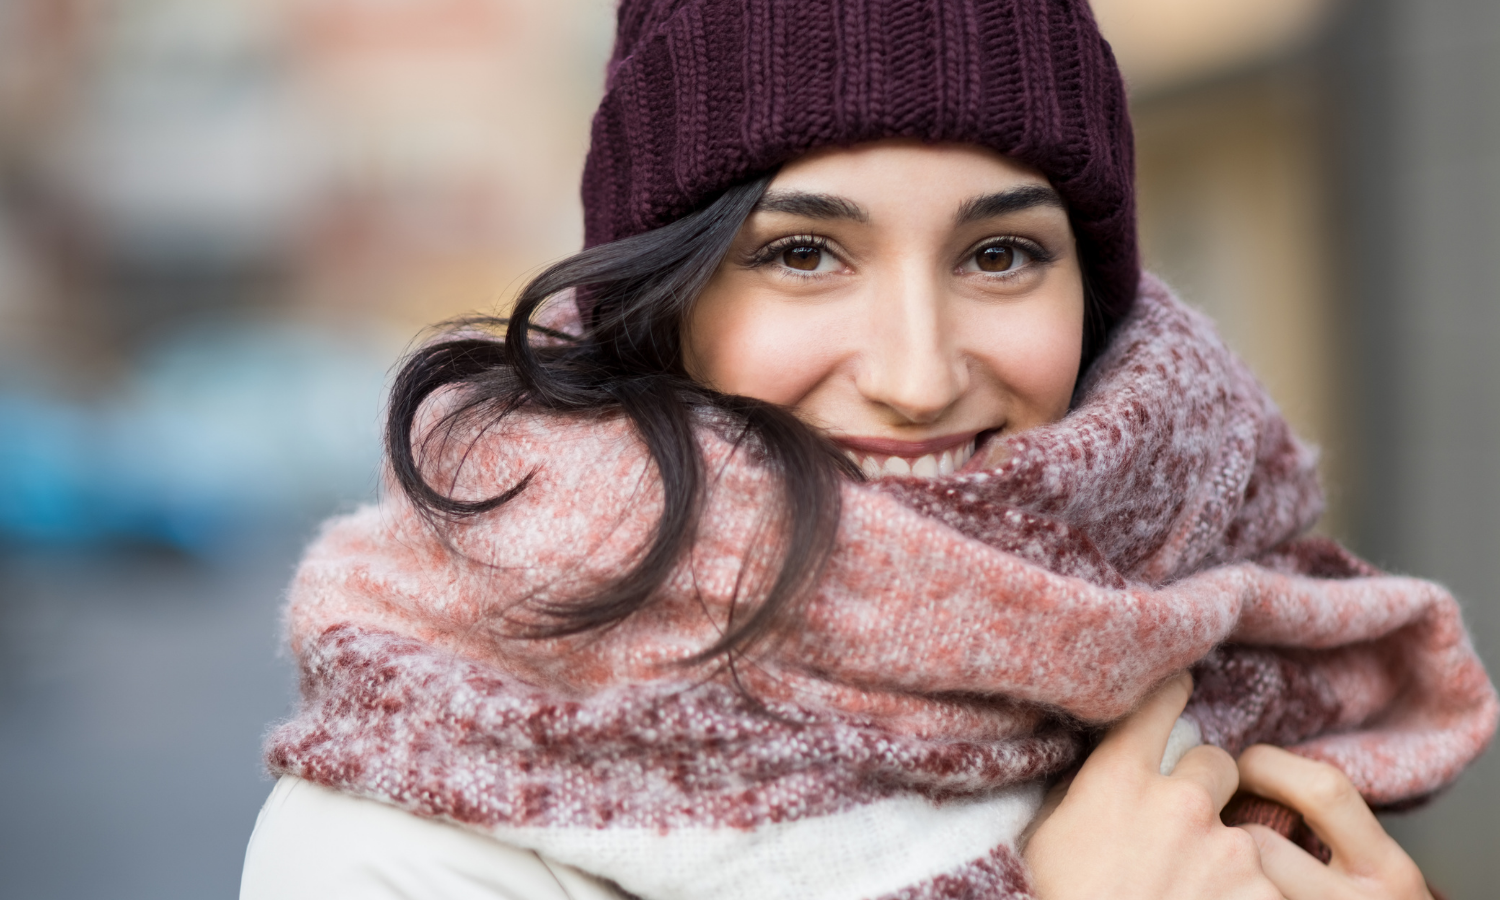 How the cold weather affects your health